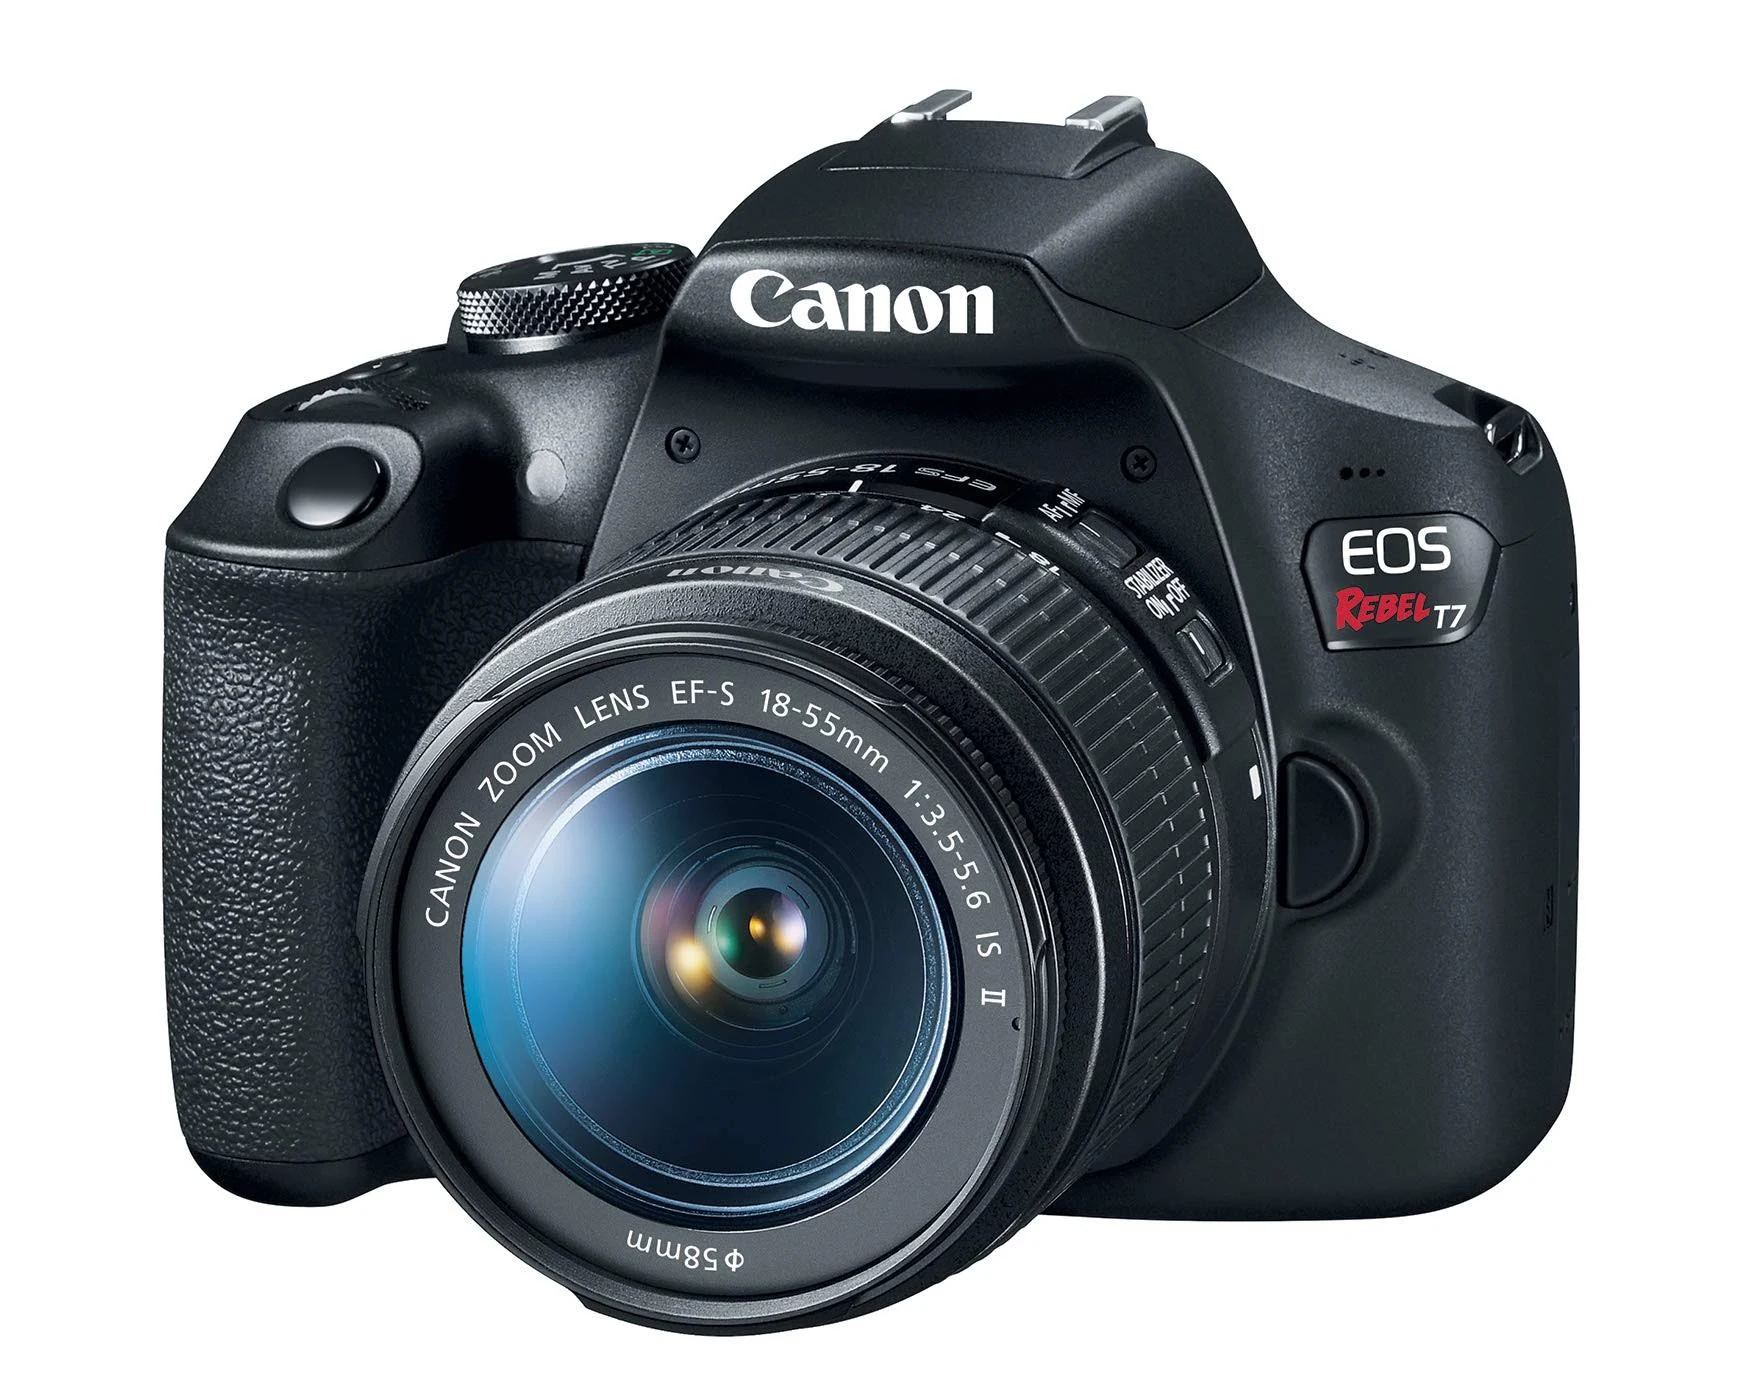 Canon USA Canon EOS Rebel T7 24.1MP DSLR Camera with EF-S 18-55mm f/3.5-5.6 IS II Lens